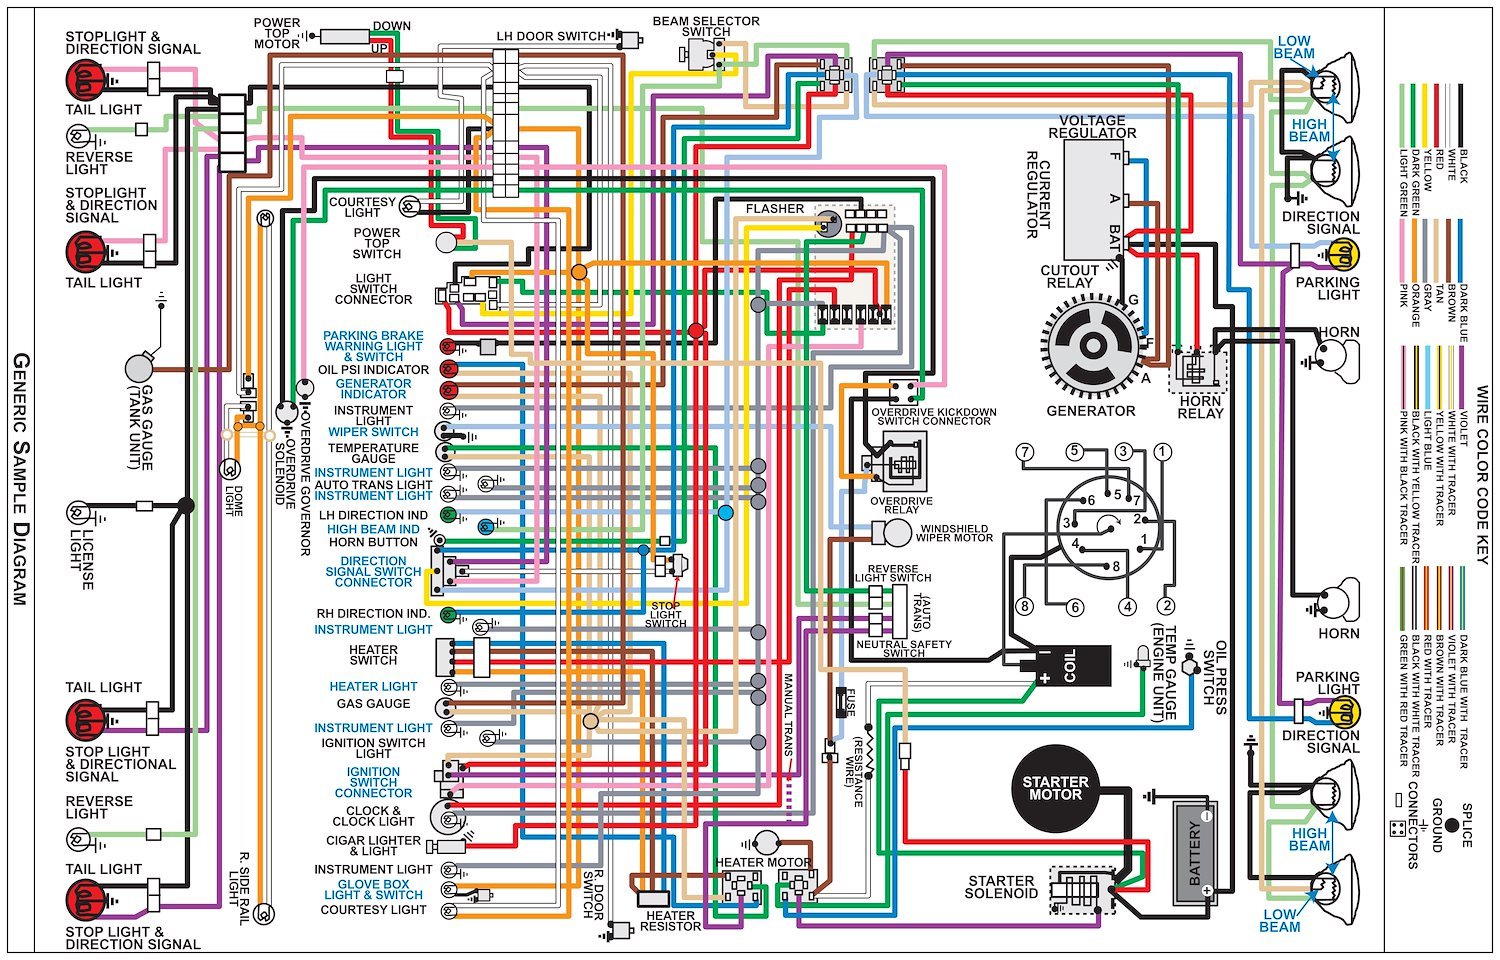 Wiring Diagram for 1956 Ford F-Series Truck, 11 in x 17 in., Laminated